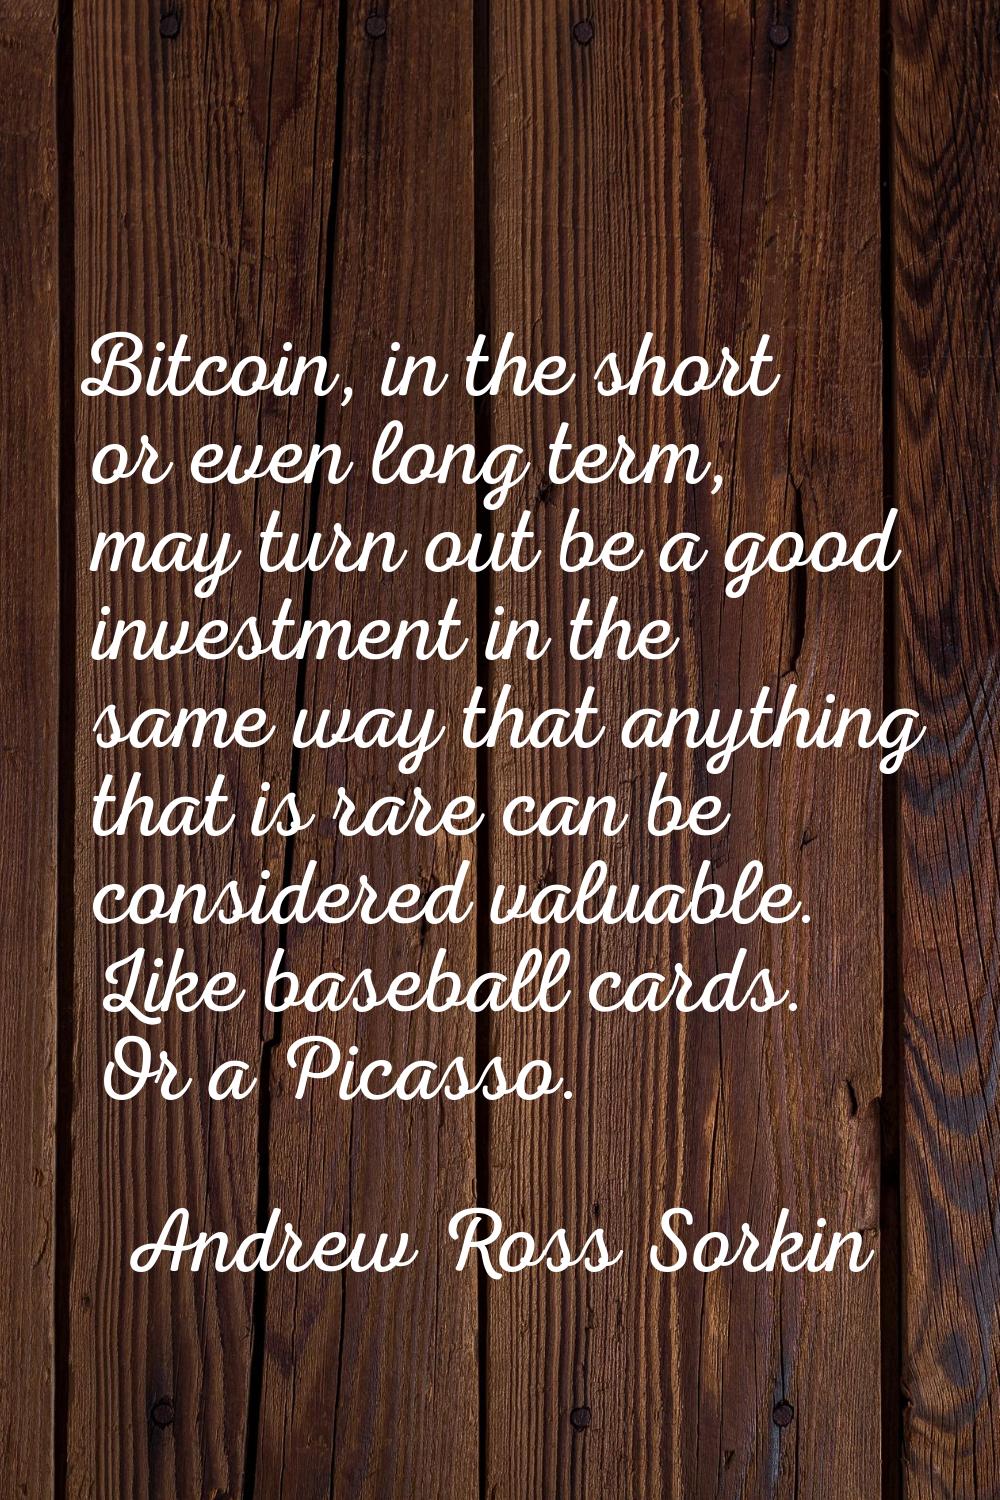 Bitcoin, in the short or even long term, may turn out be a good investment in the same way that any